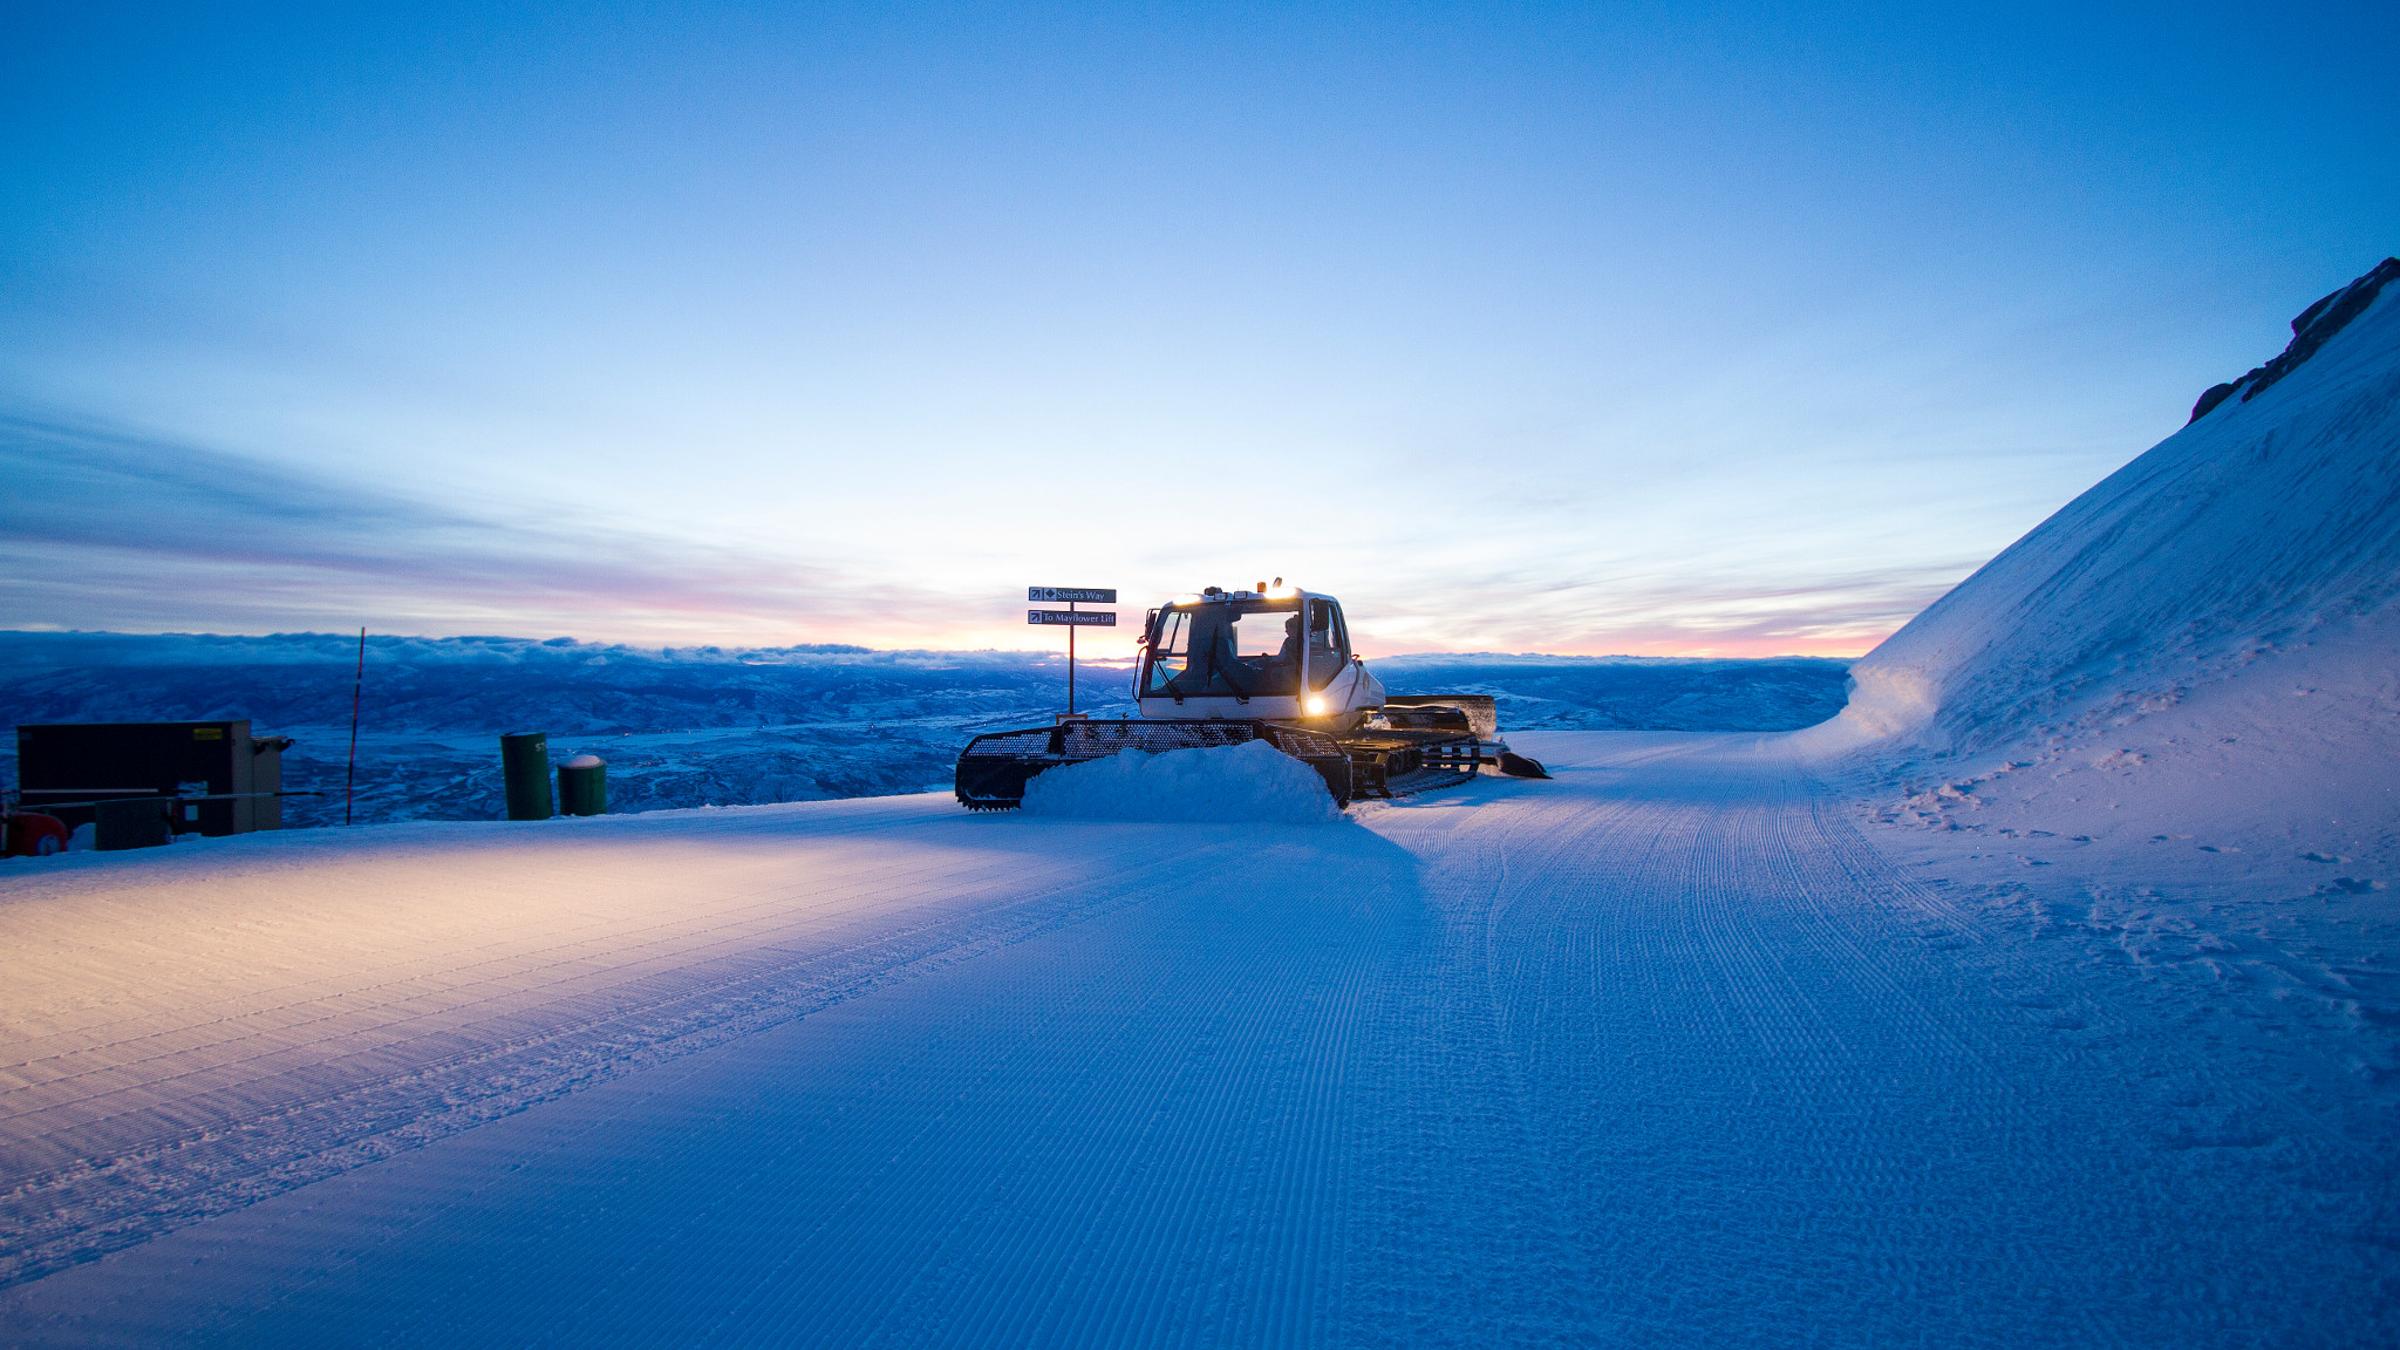 Groomer operates a snowcat to prepare slopes at Deer Valley